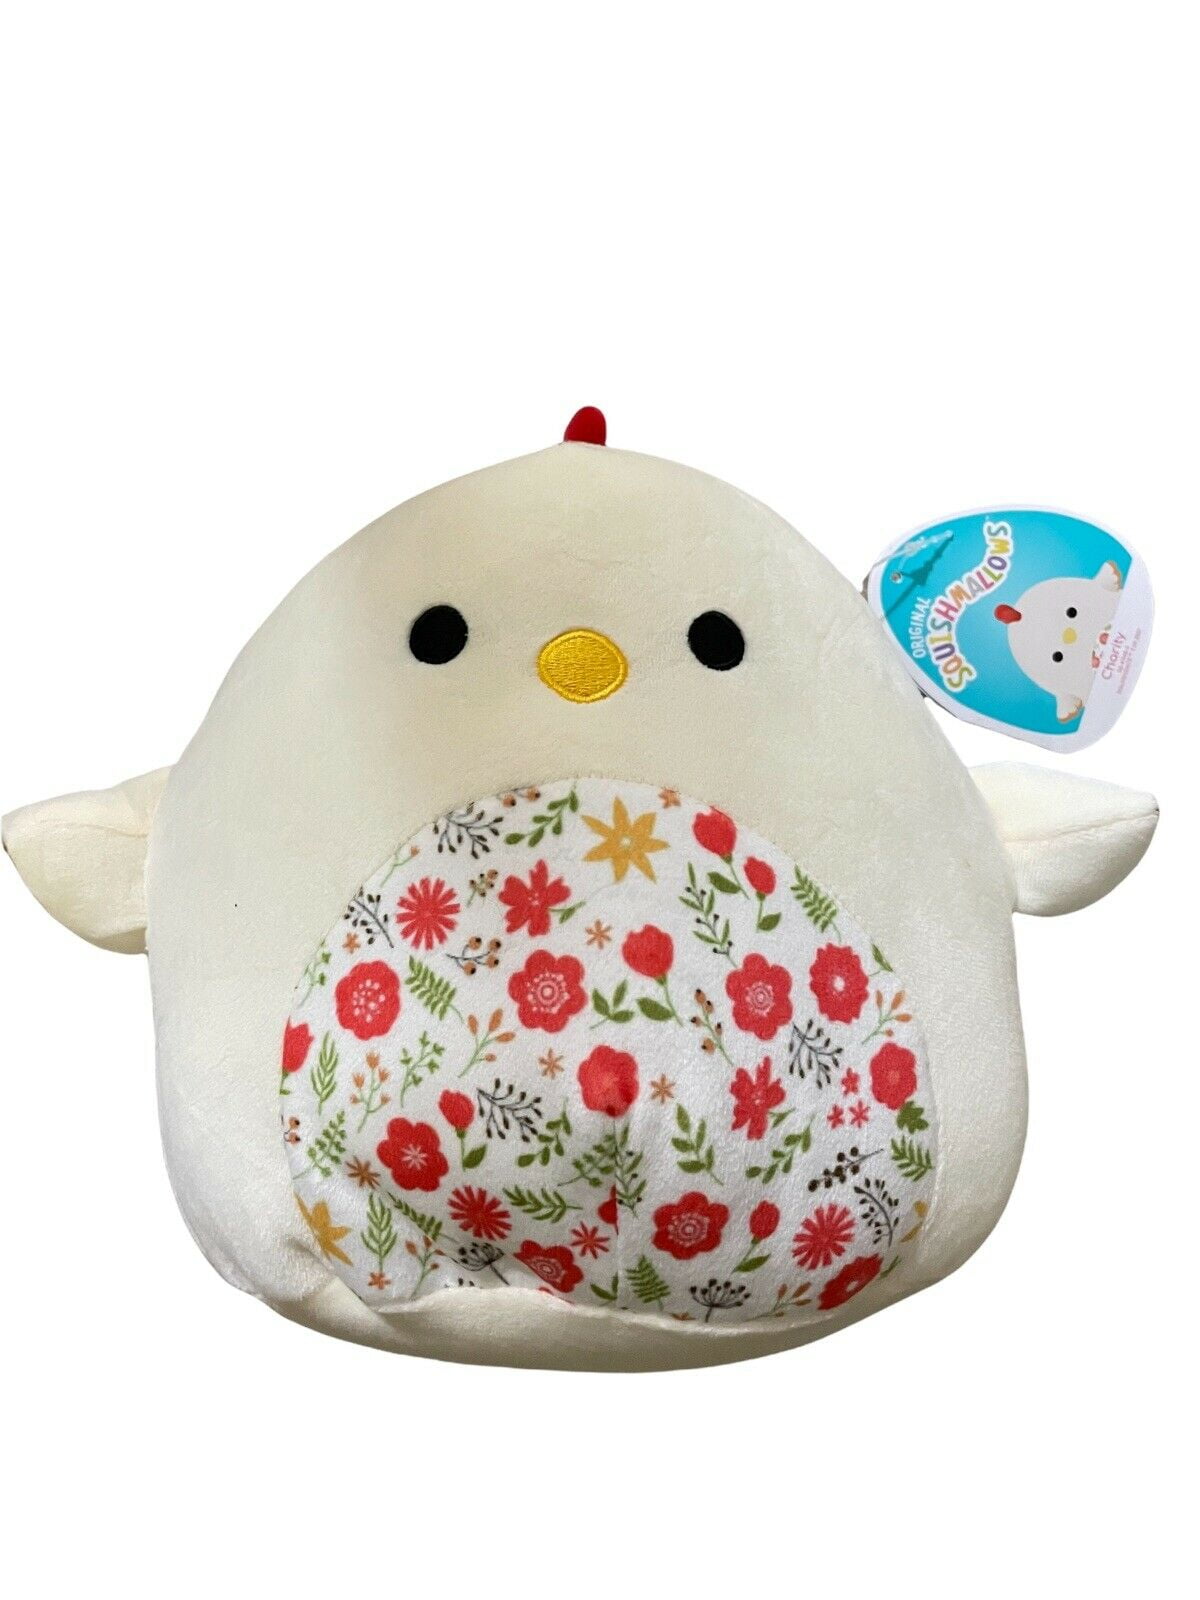 Squishmallow 8” inch Charity the Chicken Spring Plush Floral Belly Chick  Kellytoy